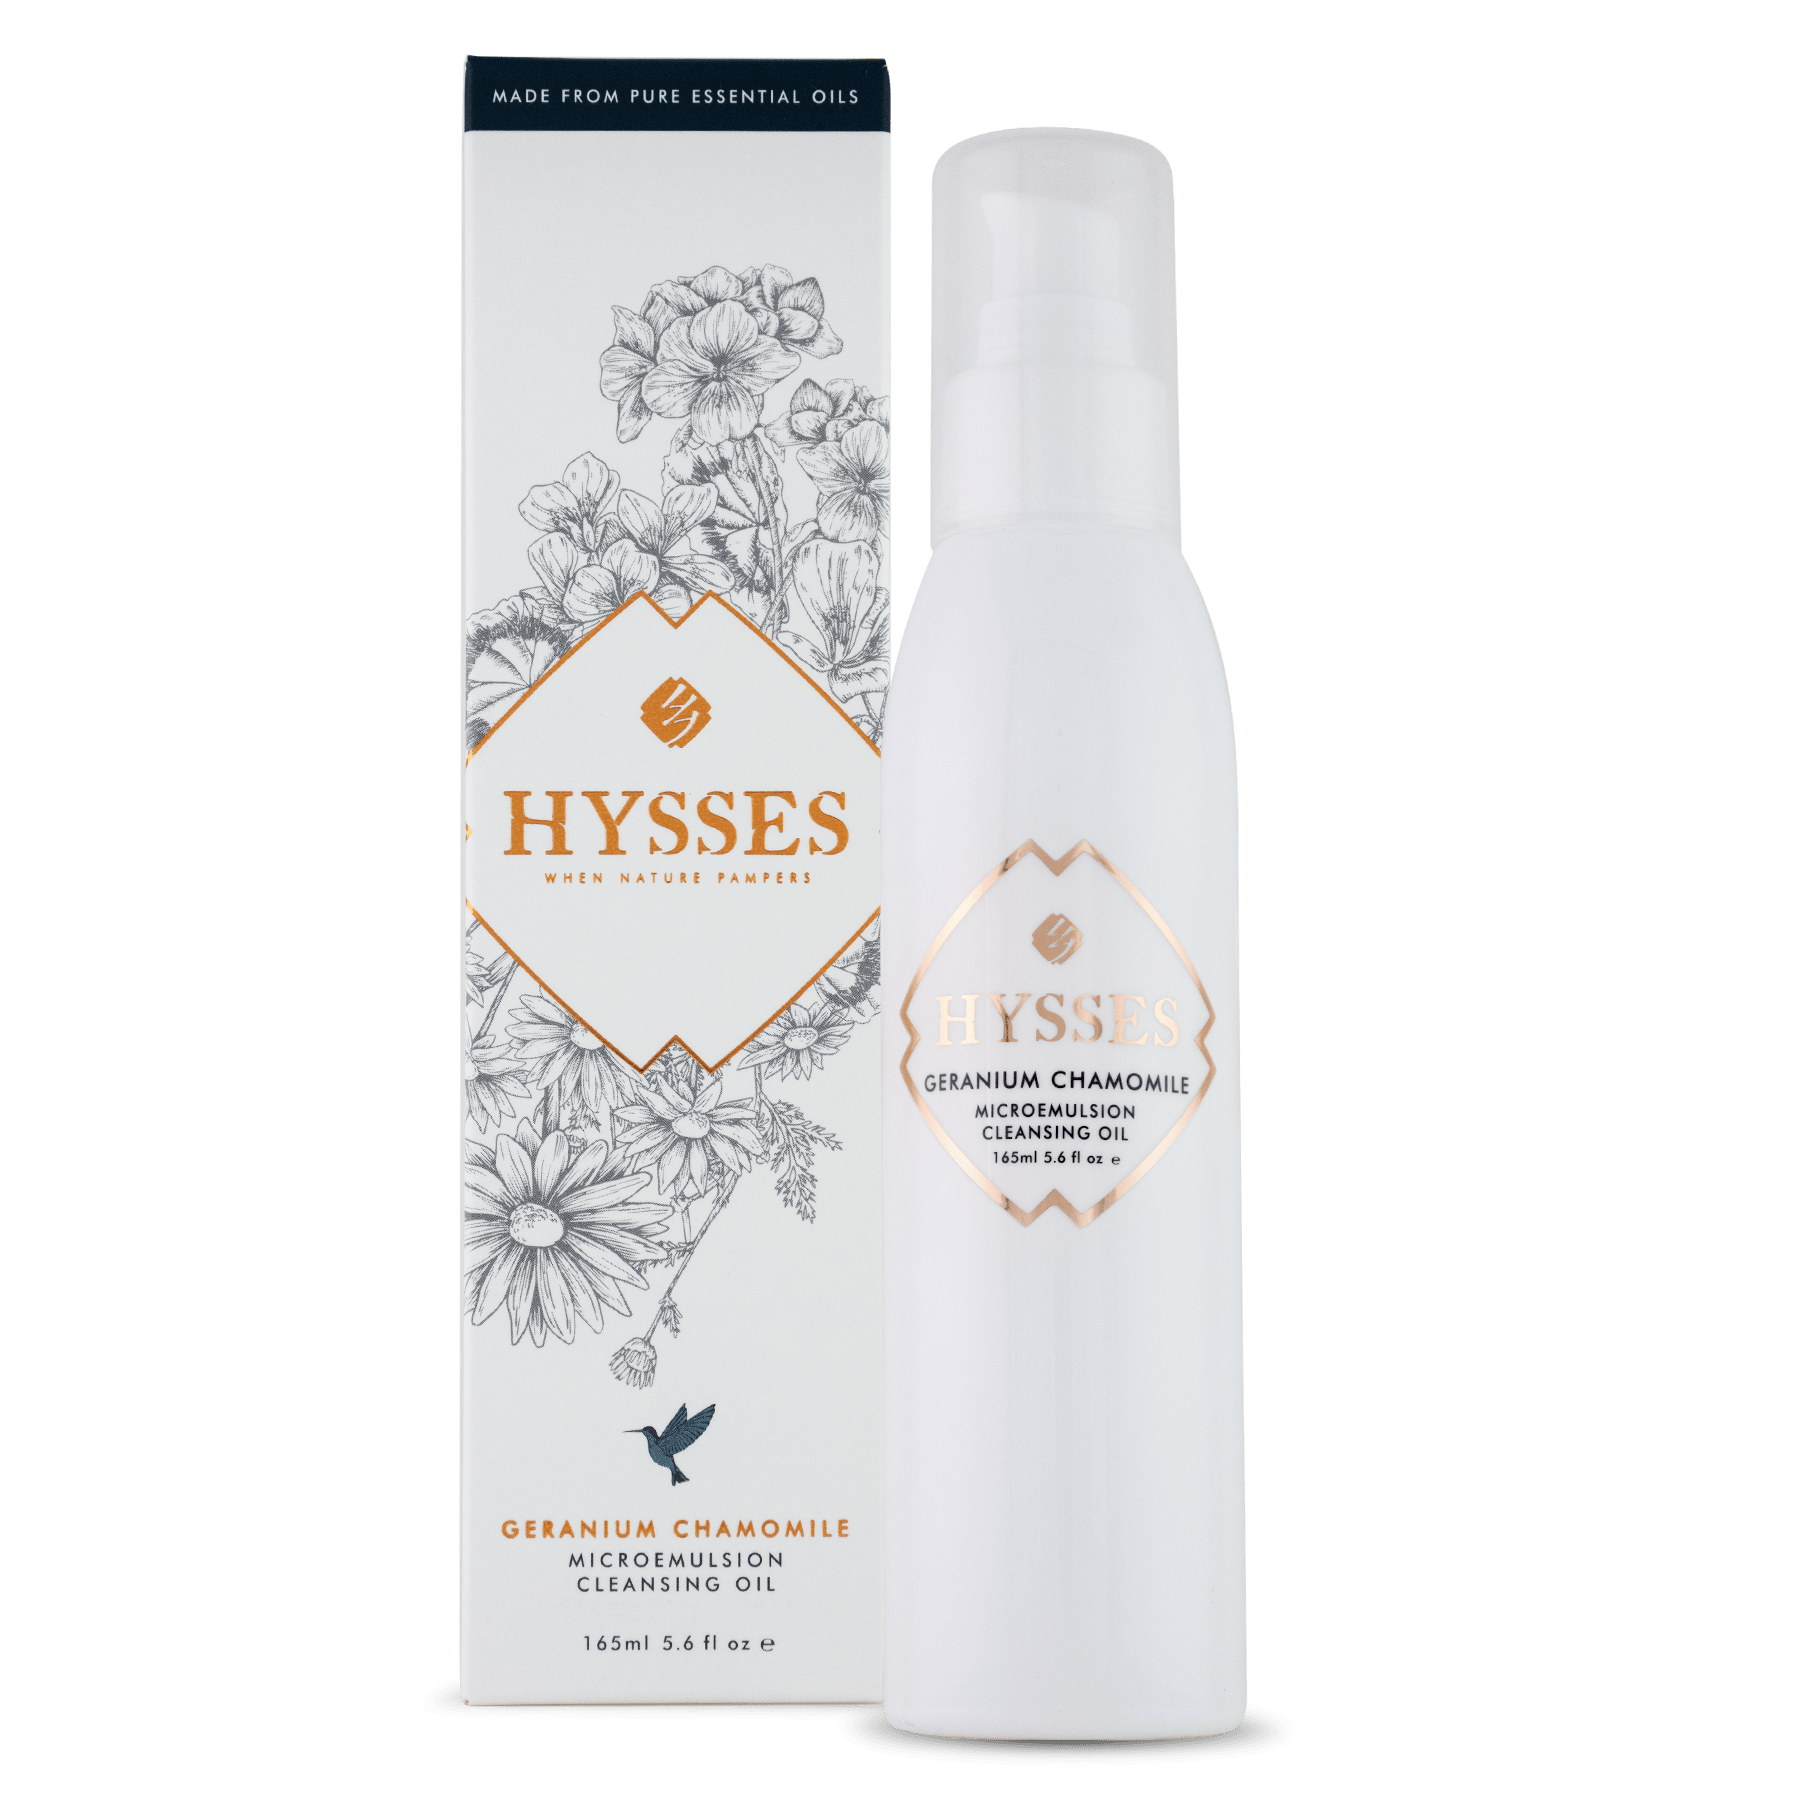 Hysses Face Care Facial Microemulsion Cleansing Oil Geranium Chamomile